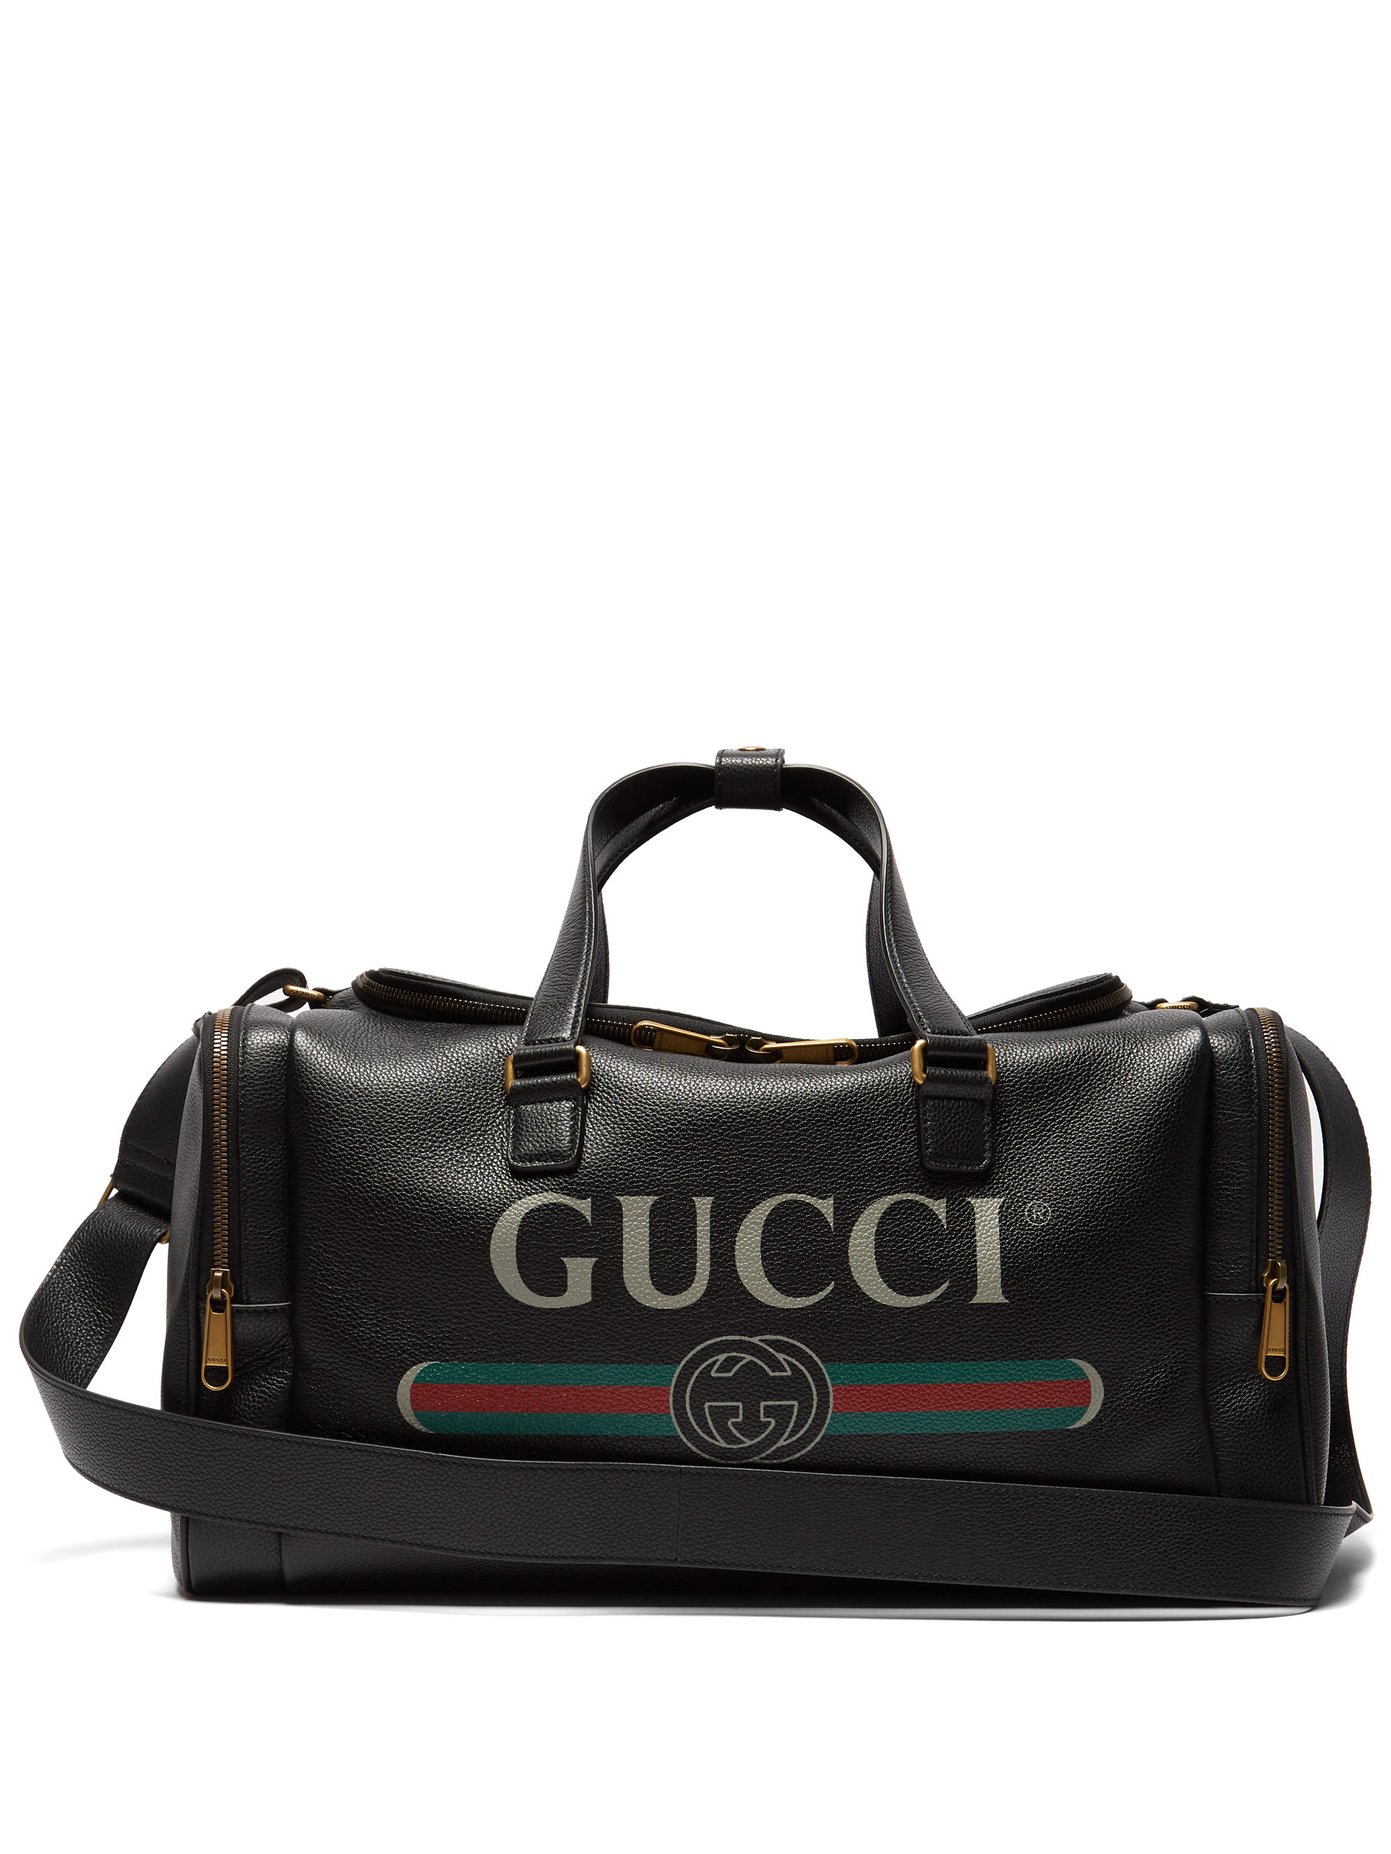 gucci hold all